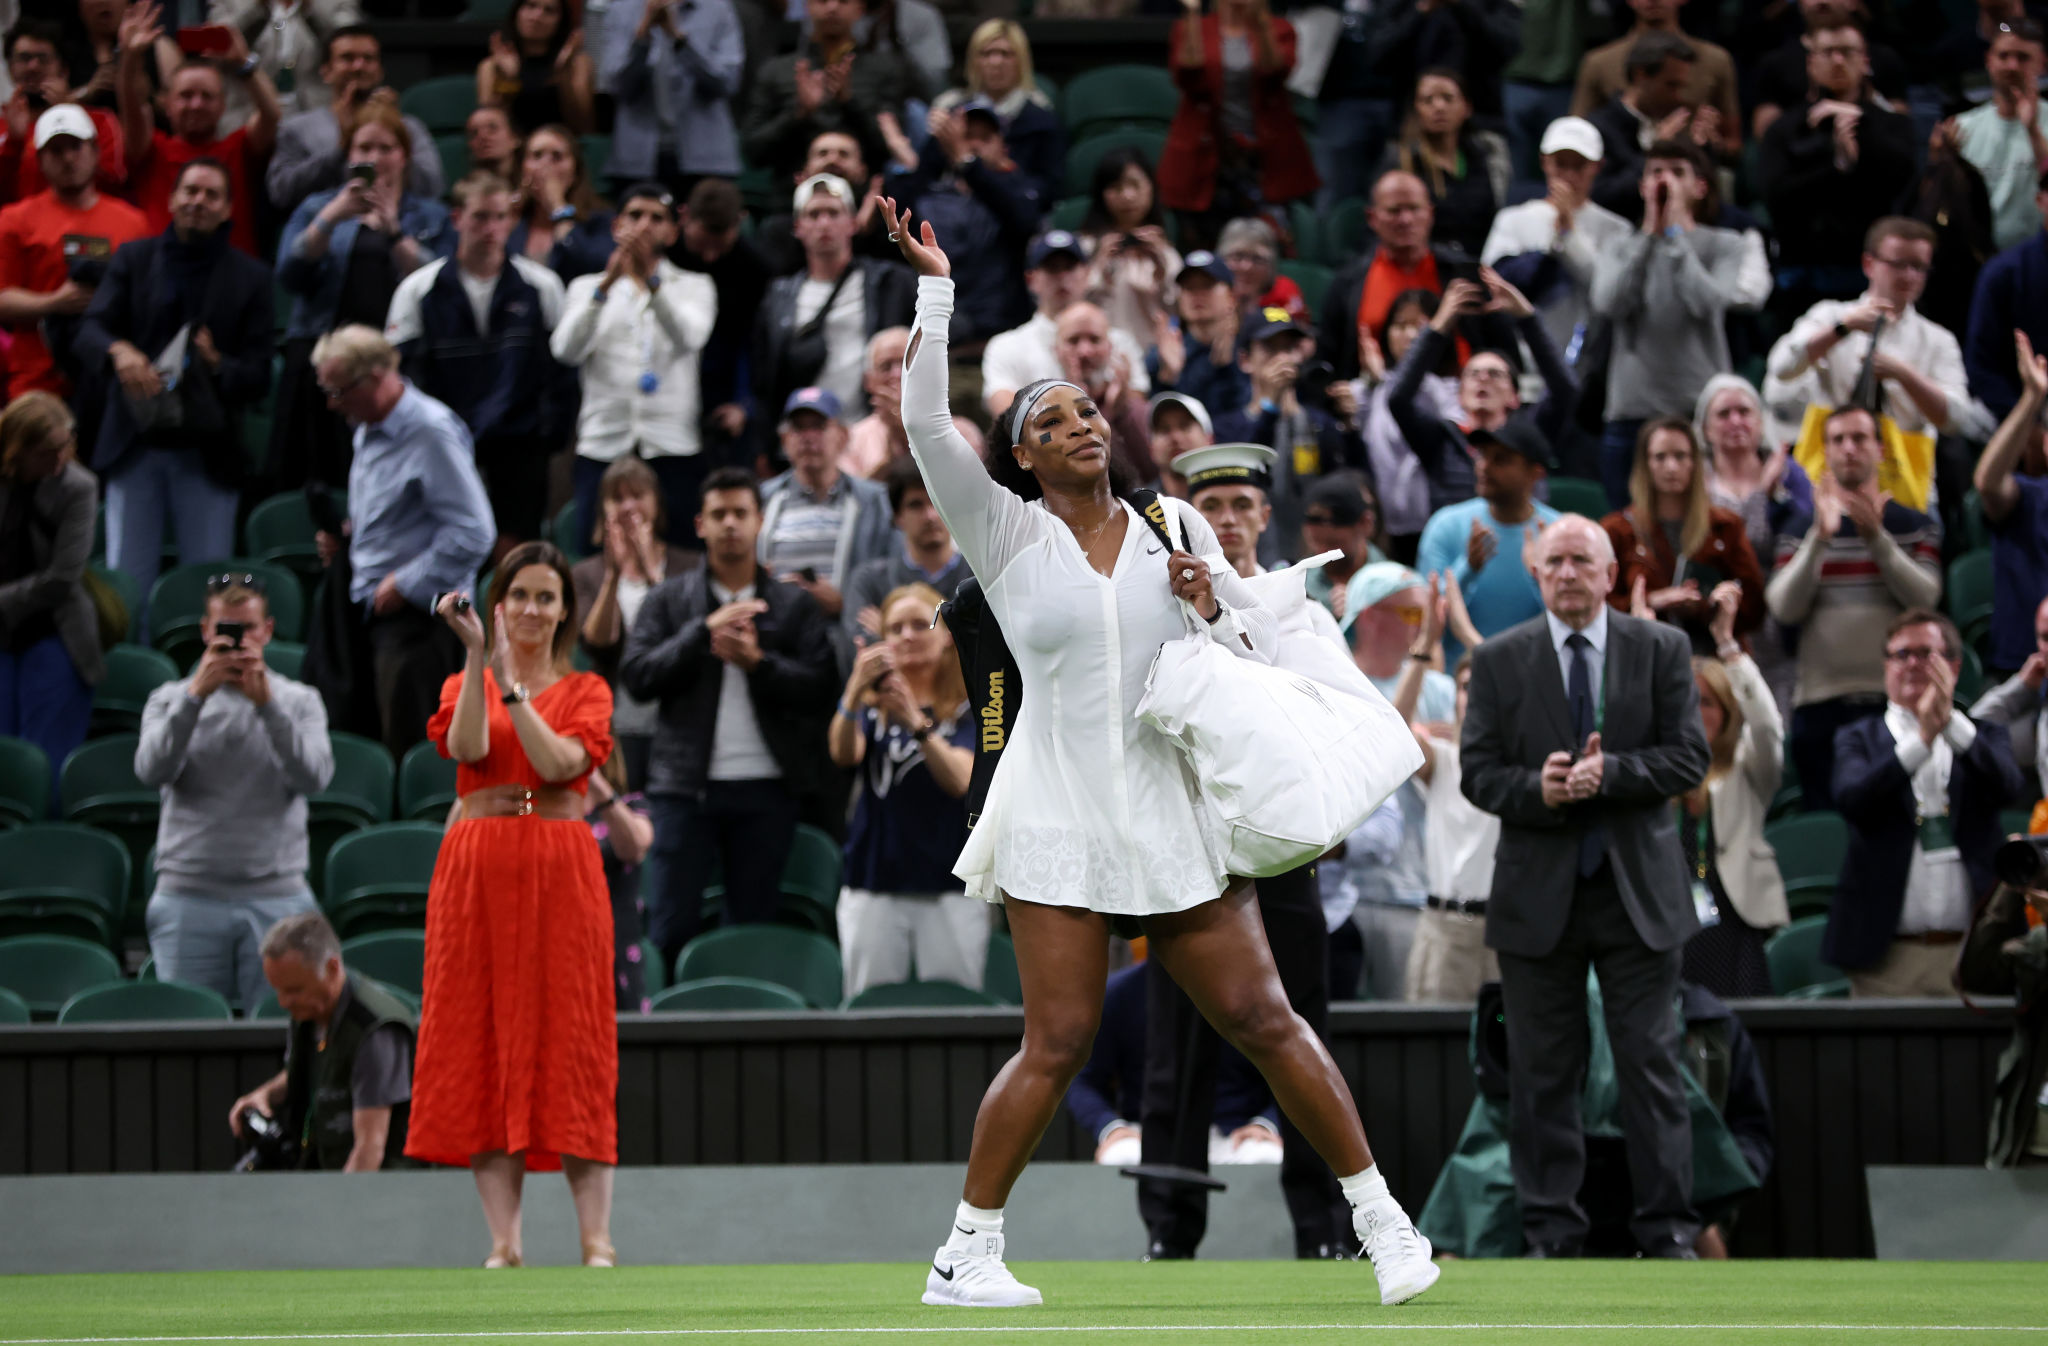 Wimbledon 2022 LIVE: Rusty Serena Williams crashes OUT from Wimbledon, loses to 115-ranked Harmony Tan in FIRST-ROUND: Check Highlights